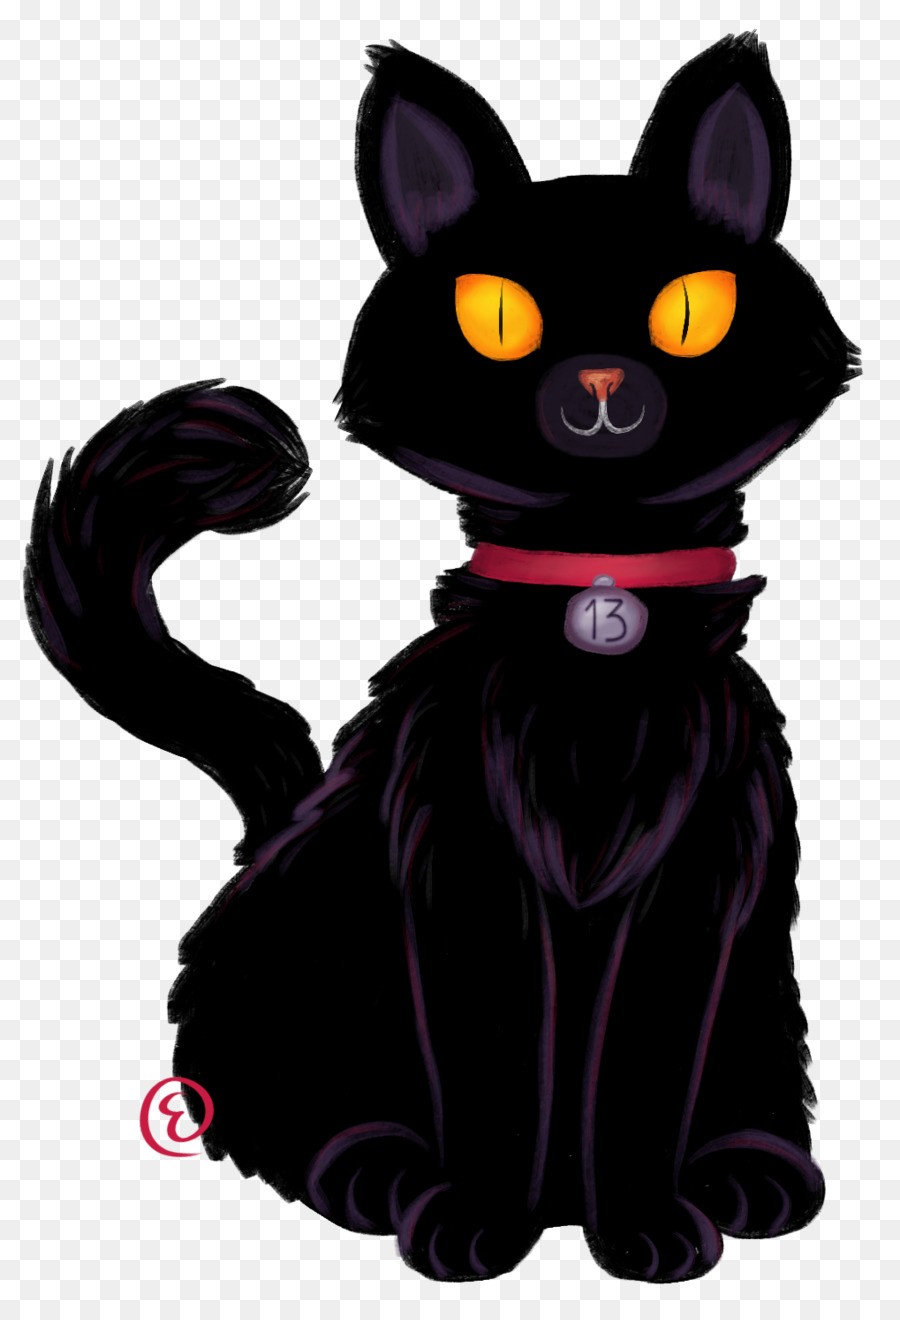 Black cat Whiskers Dog Collar - friday 13th png download - 1019*1491 - Free Transparent Black Cat png Download.